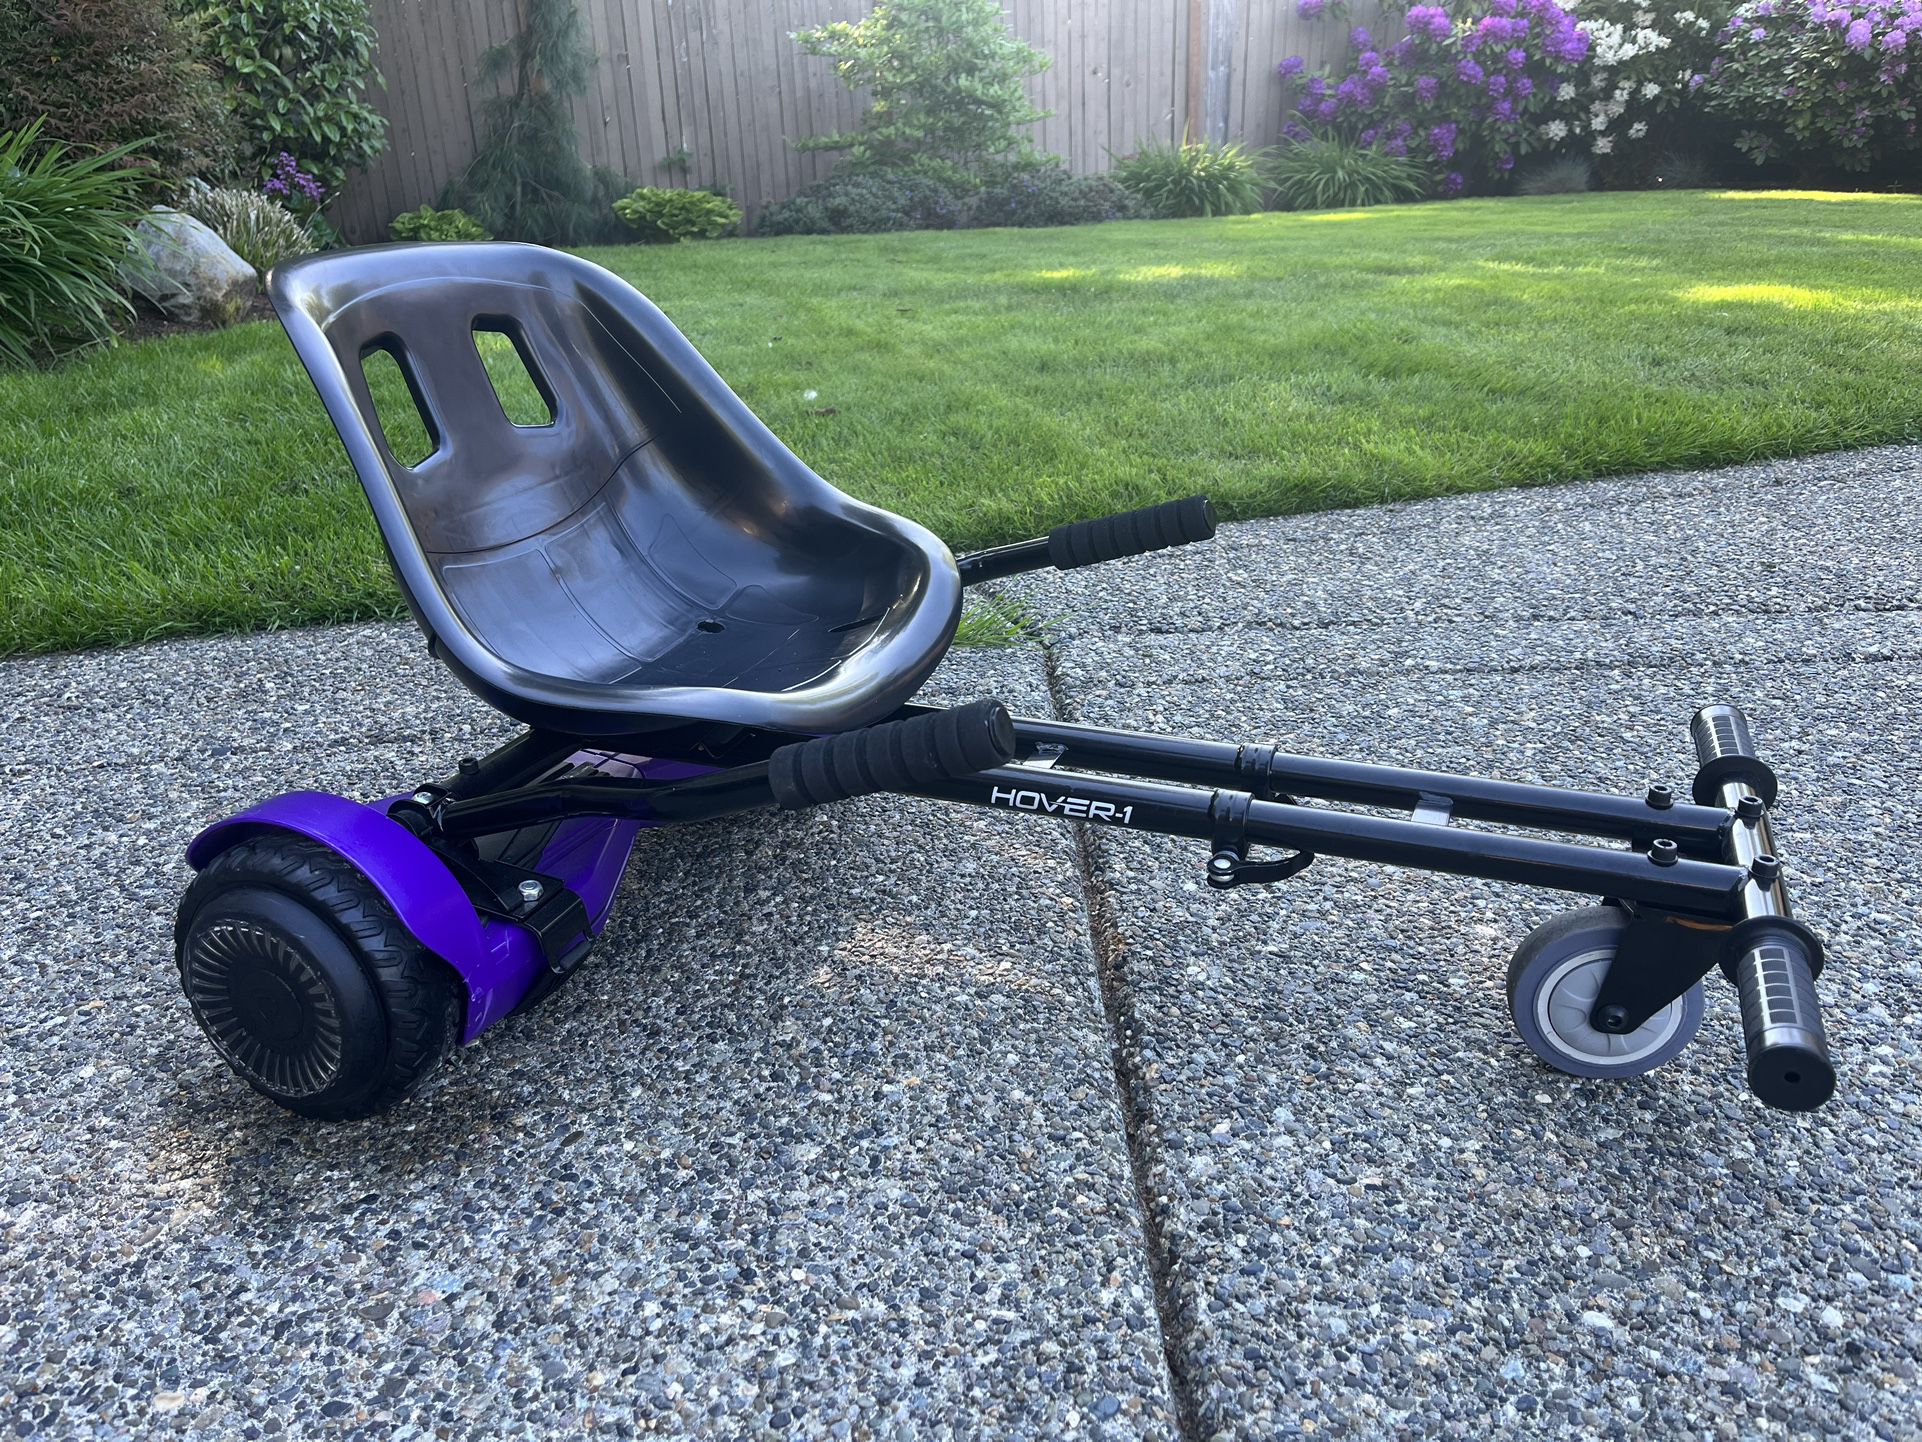 Jetson Hoverboard With Hover-1 Seat Attachment